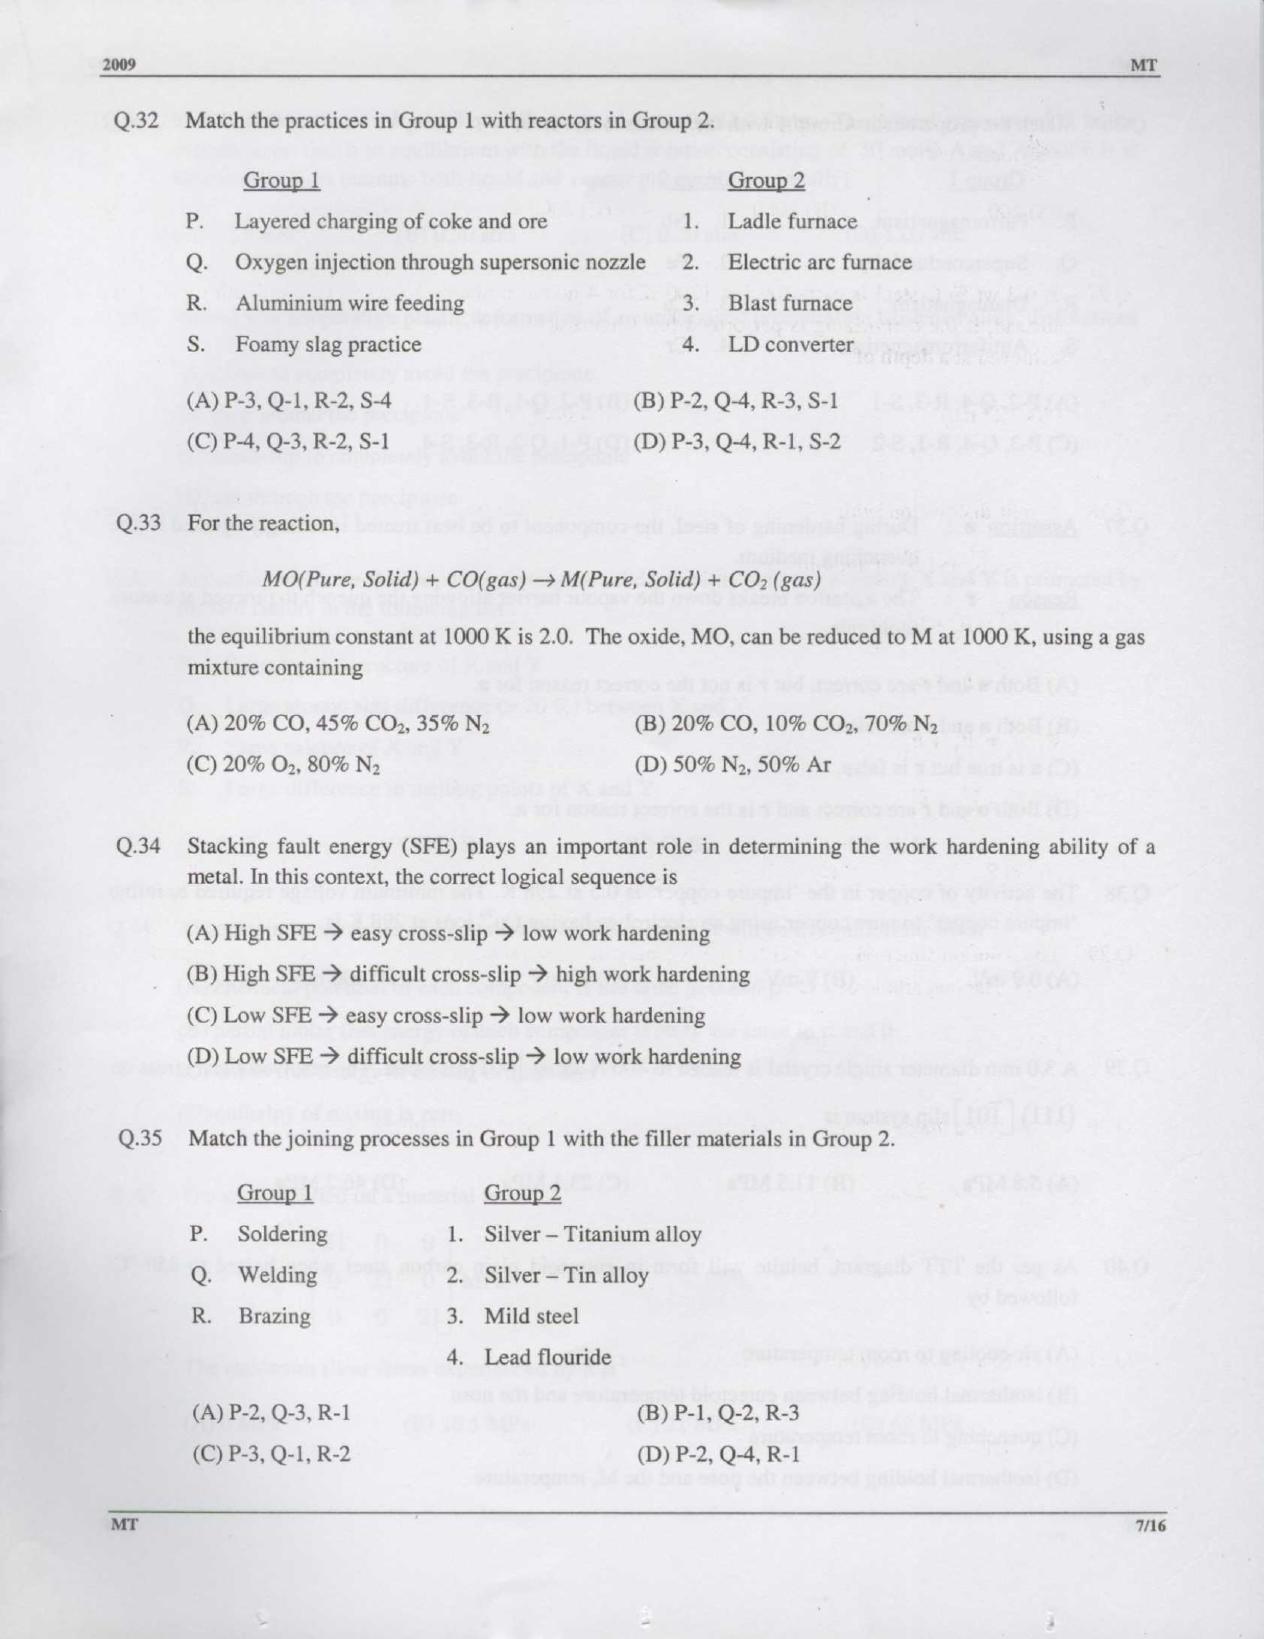 GATE 2009 Metallurgical Engineering (MT) Question Paper with Answer Key - Page 7